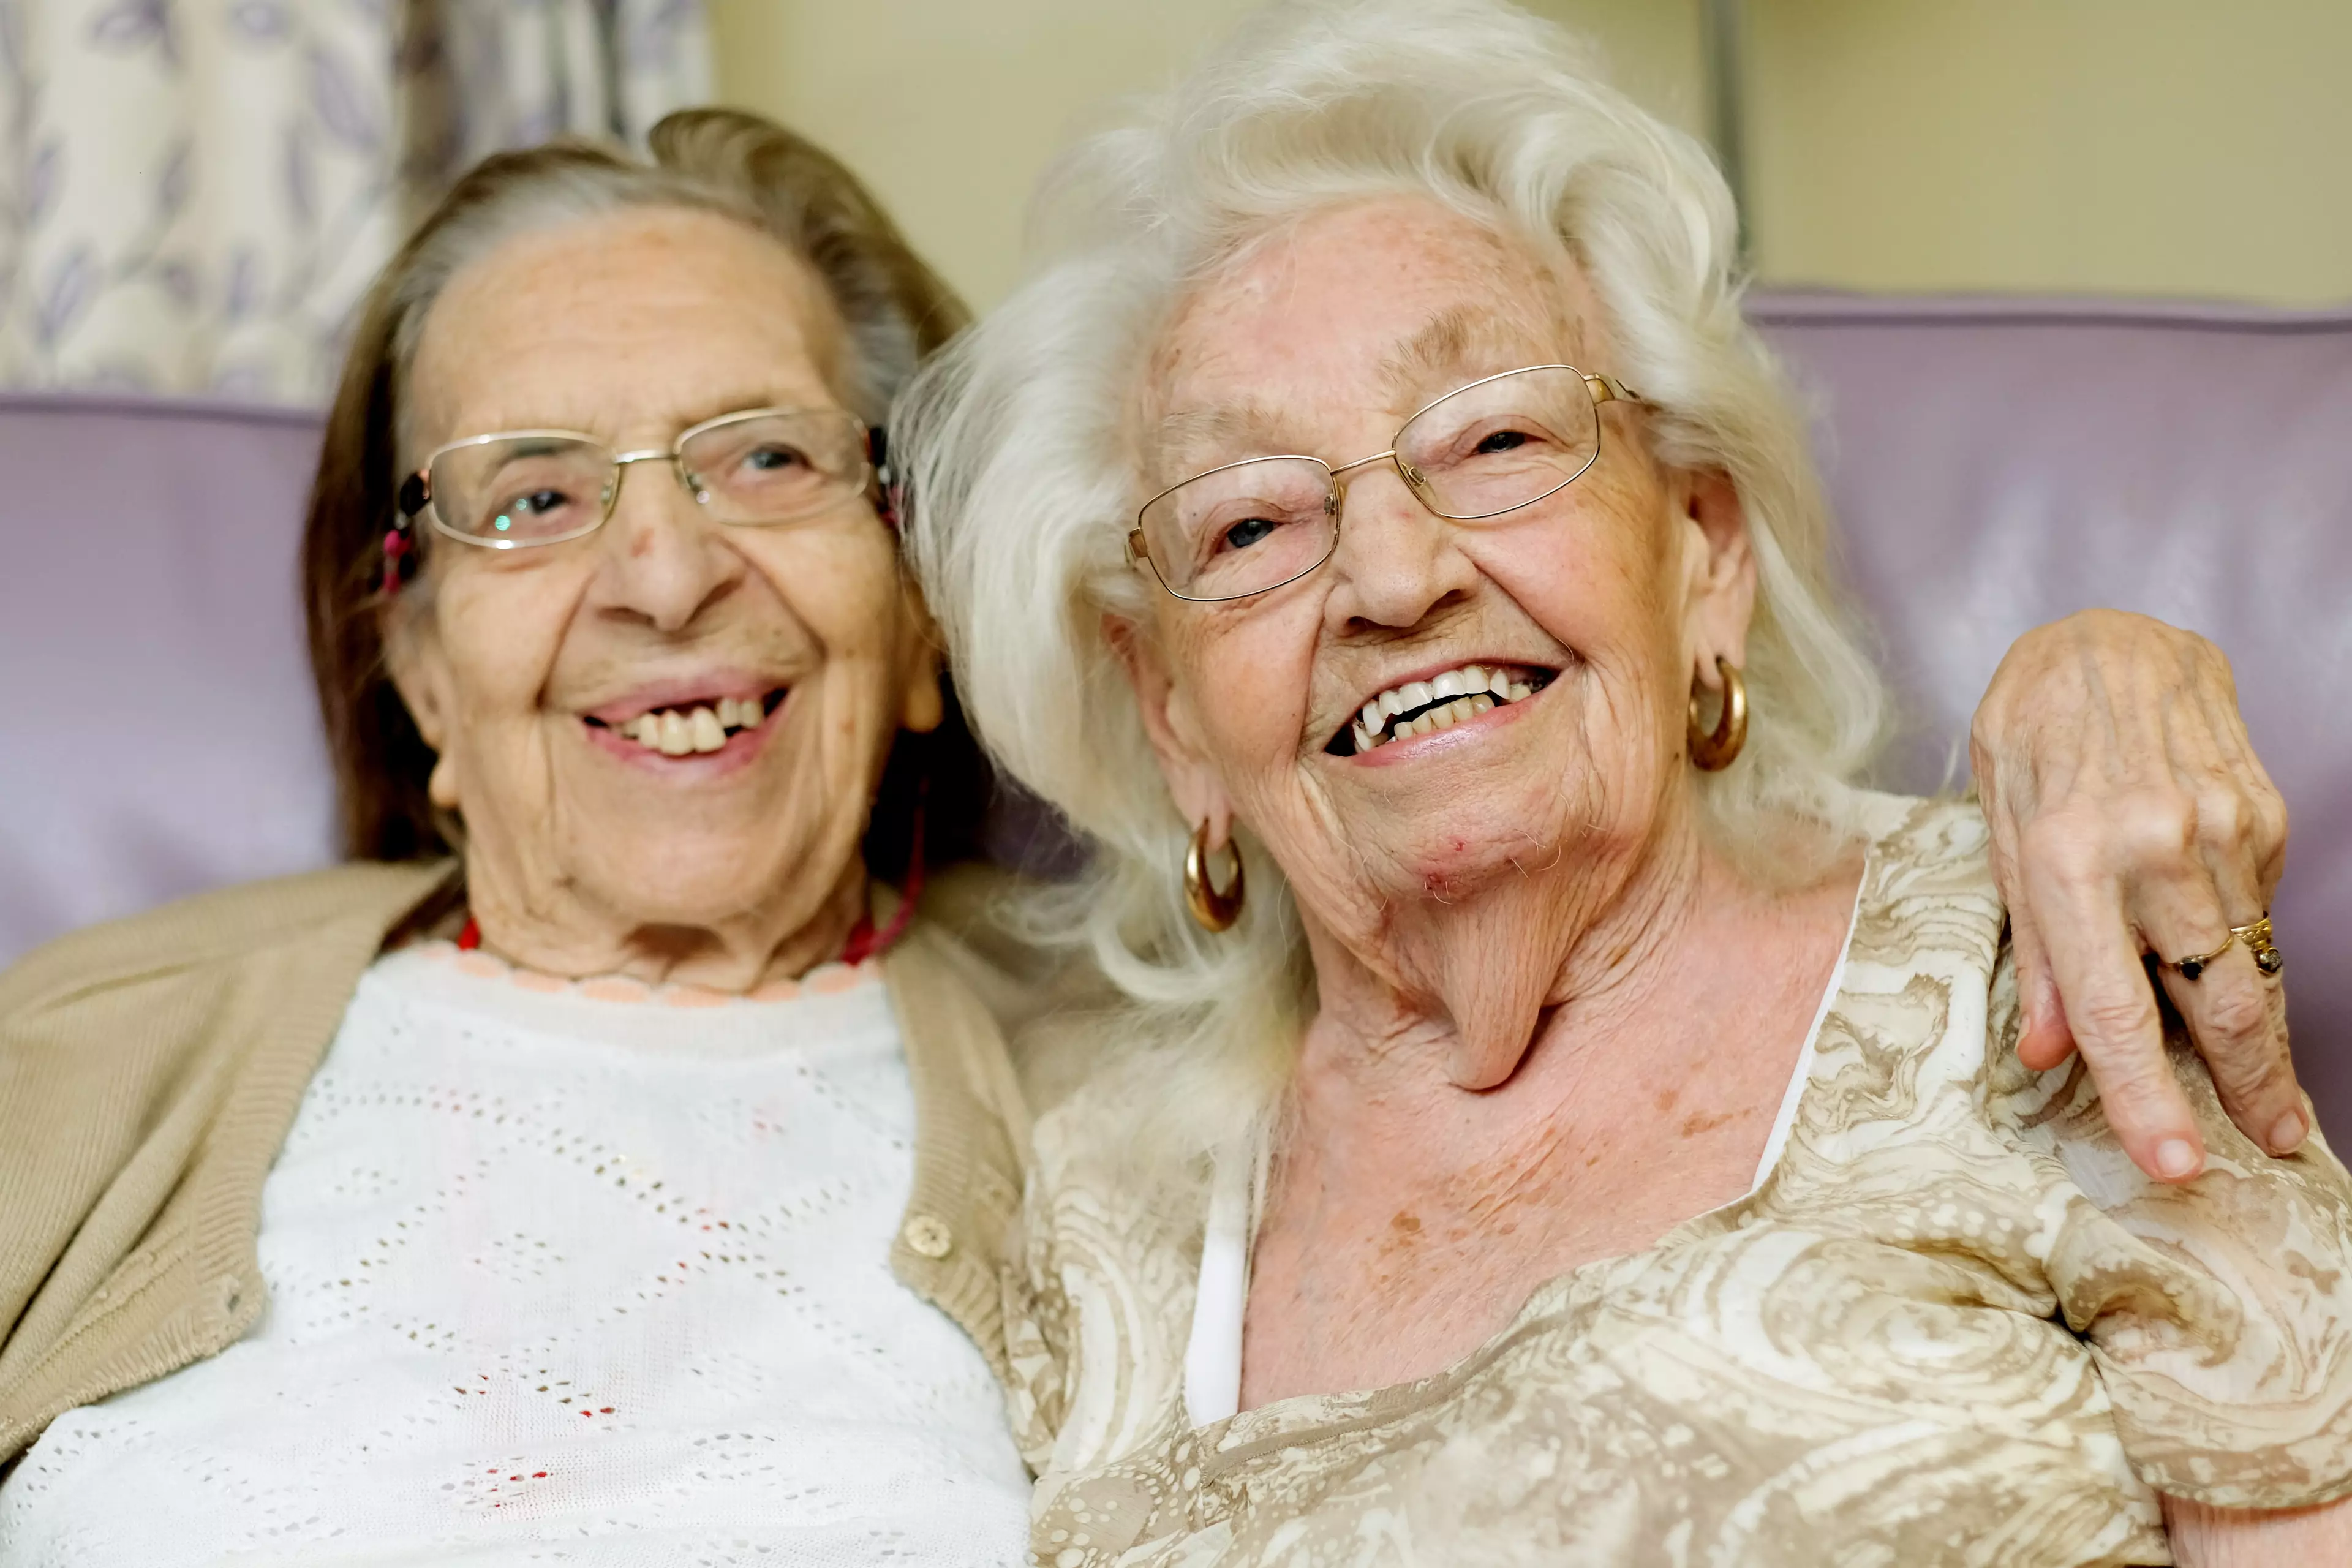 89-year-old BBF's Olive Woodward (left) and Kathleen Saville (right) are living in the same care home (